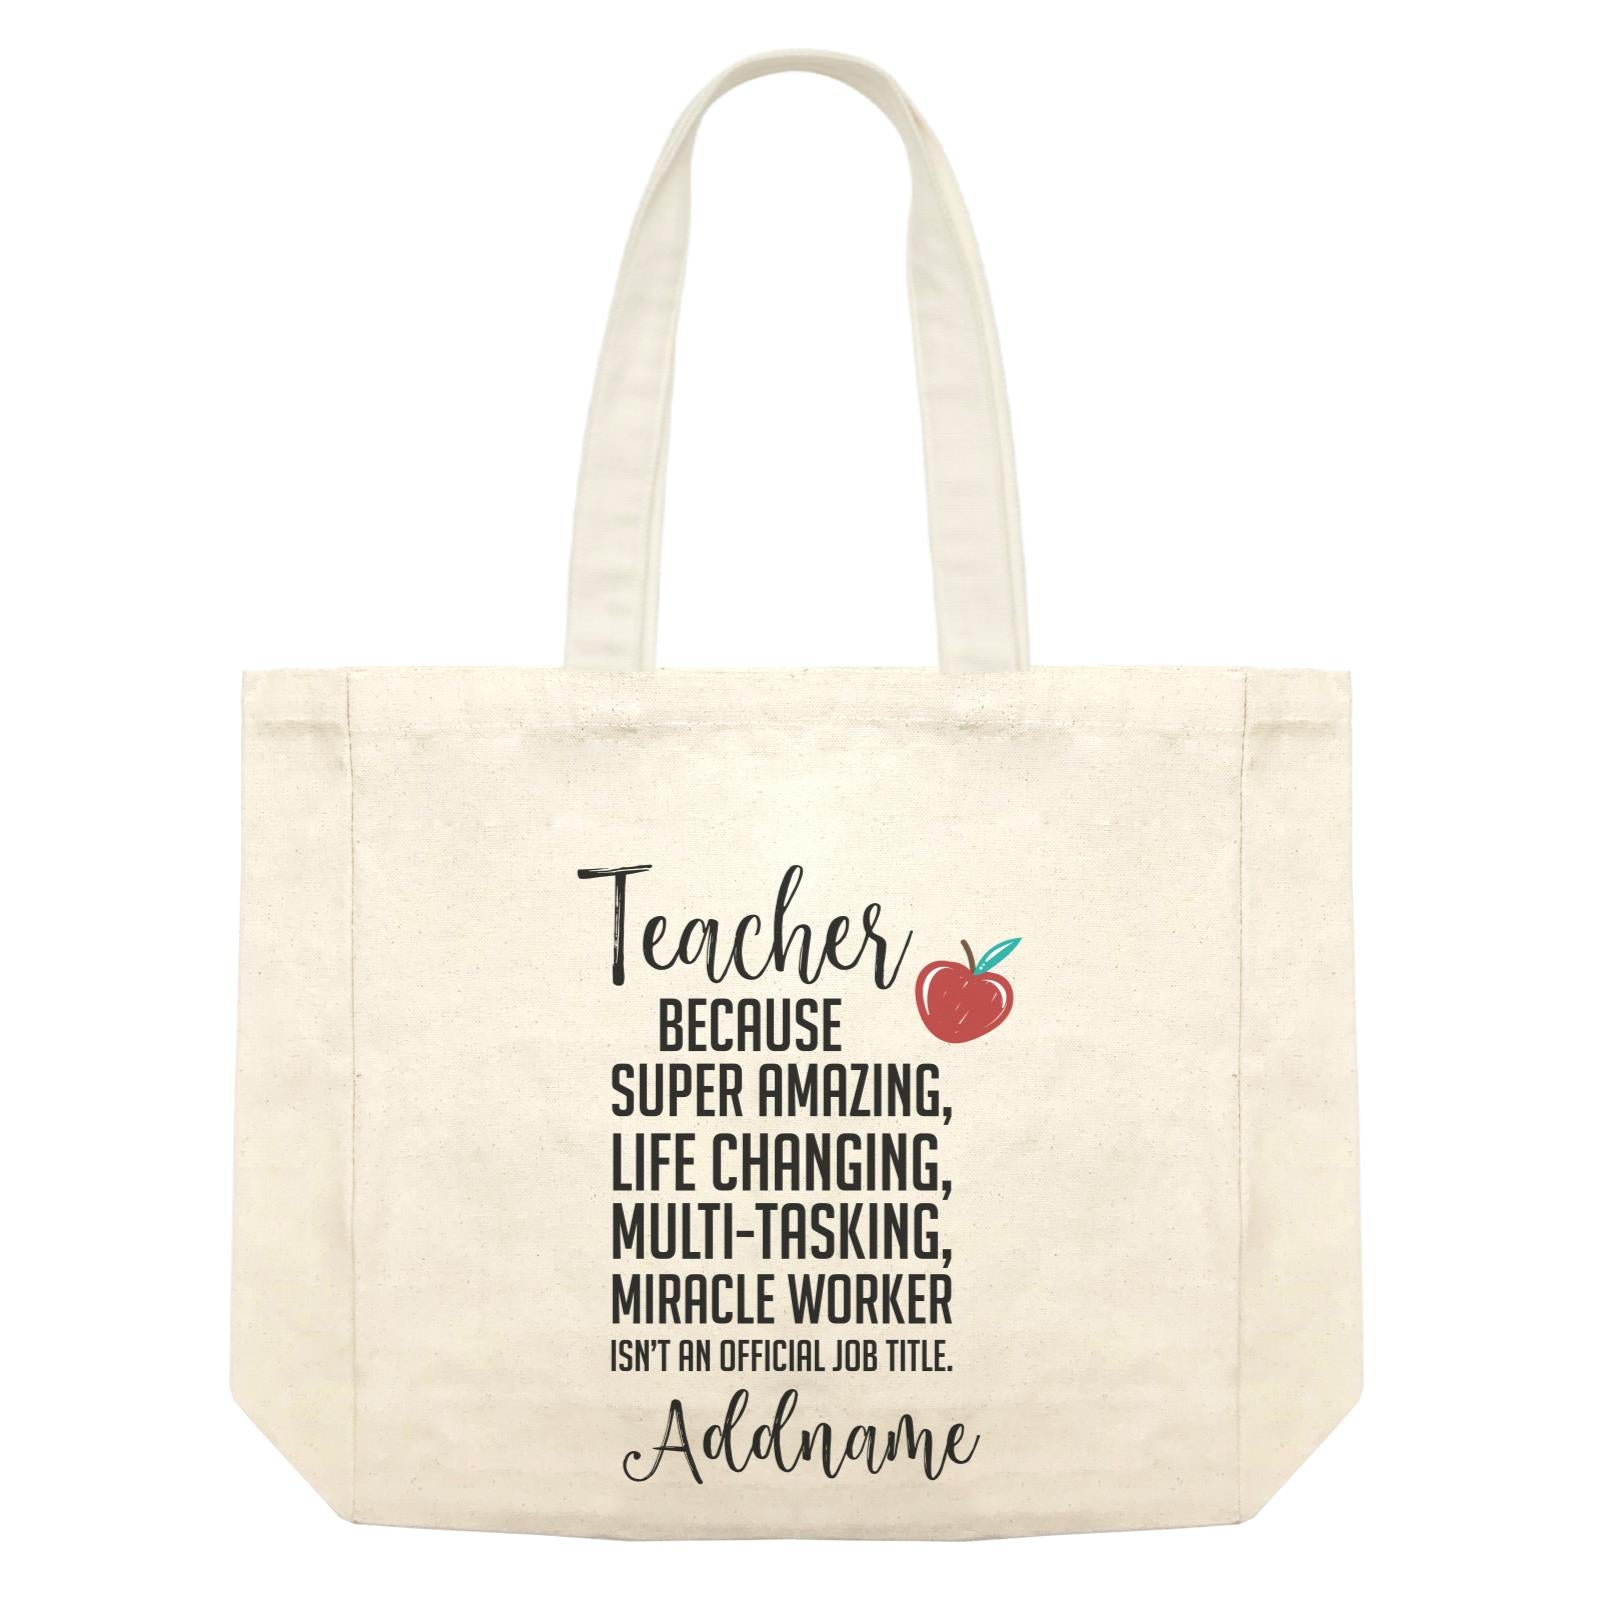 Teacher Quotes Teacher Miracle Worker Isn't An Official Job Title Addname Shopping Bag